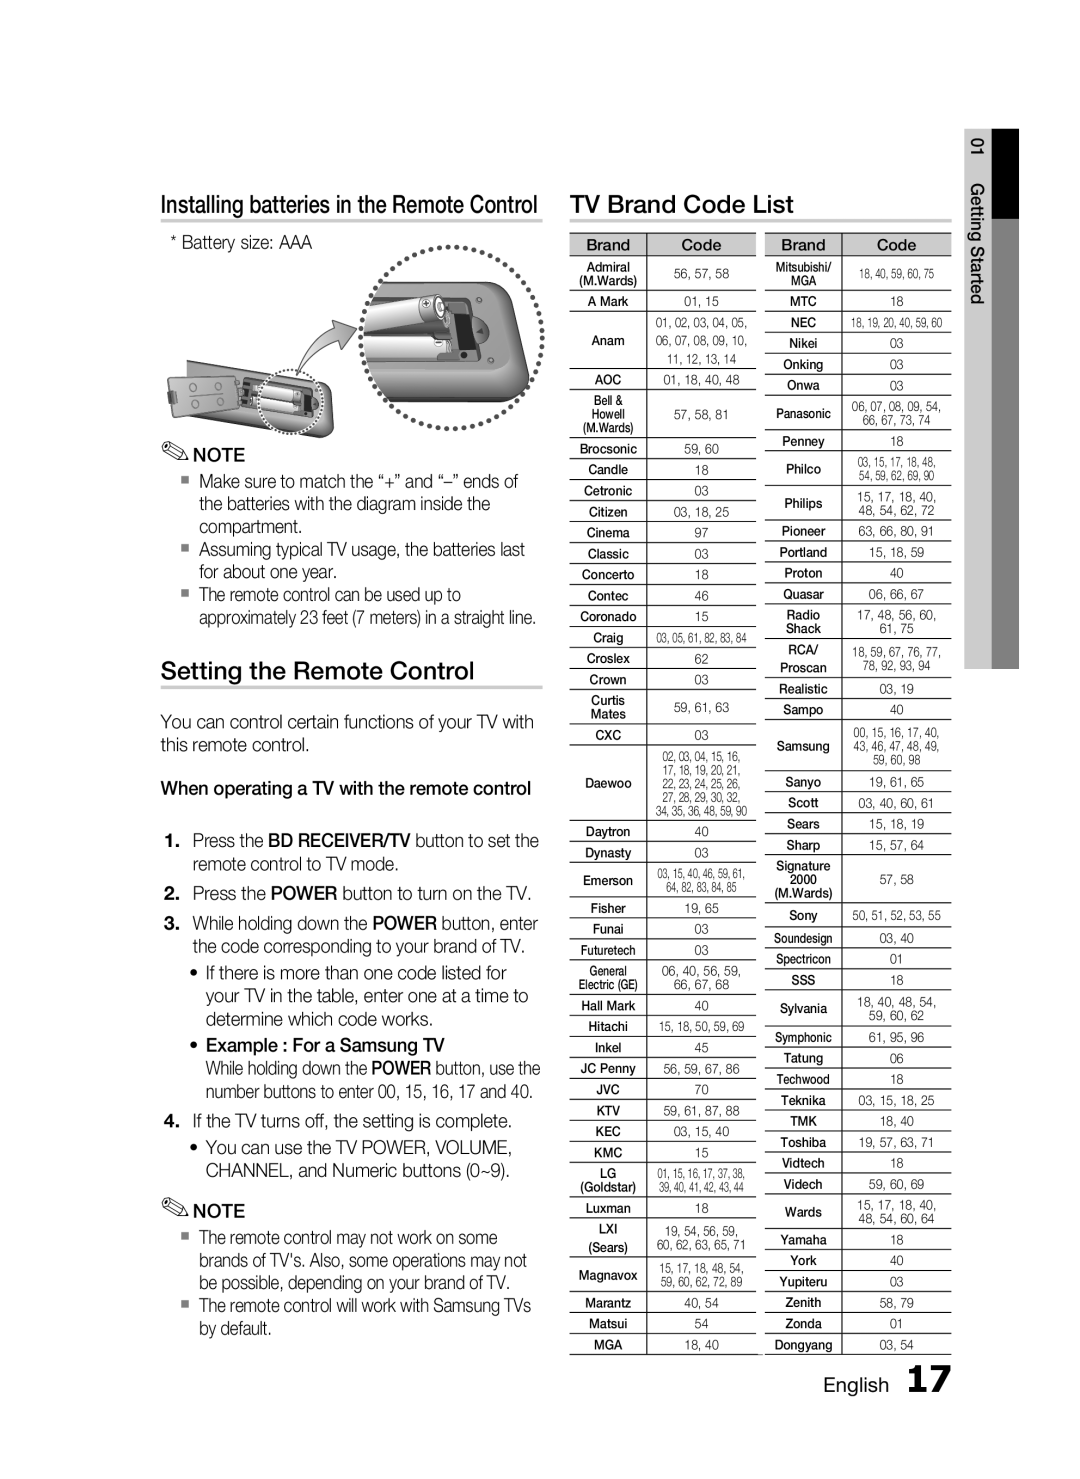 Samsung HT-C6730W TV Brand Code List, Setting the Remote Control, Installing batteries in the Remote Control, English 